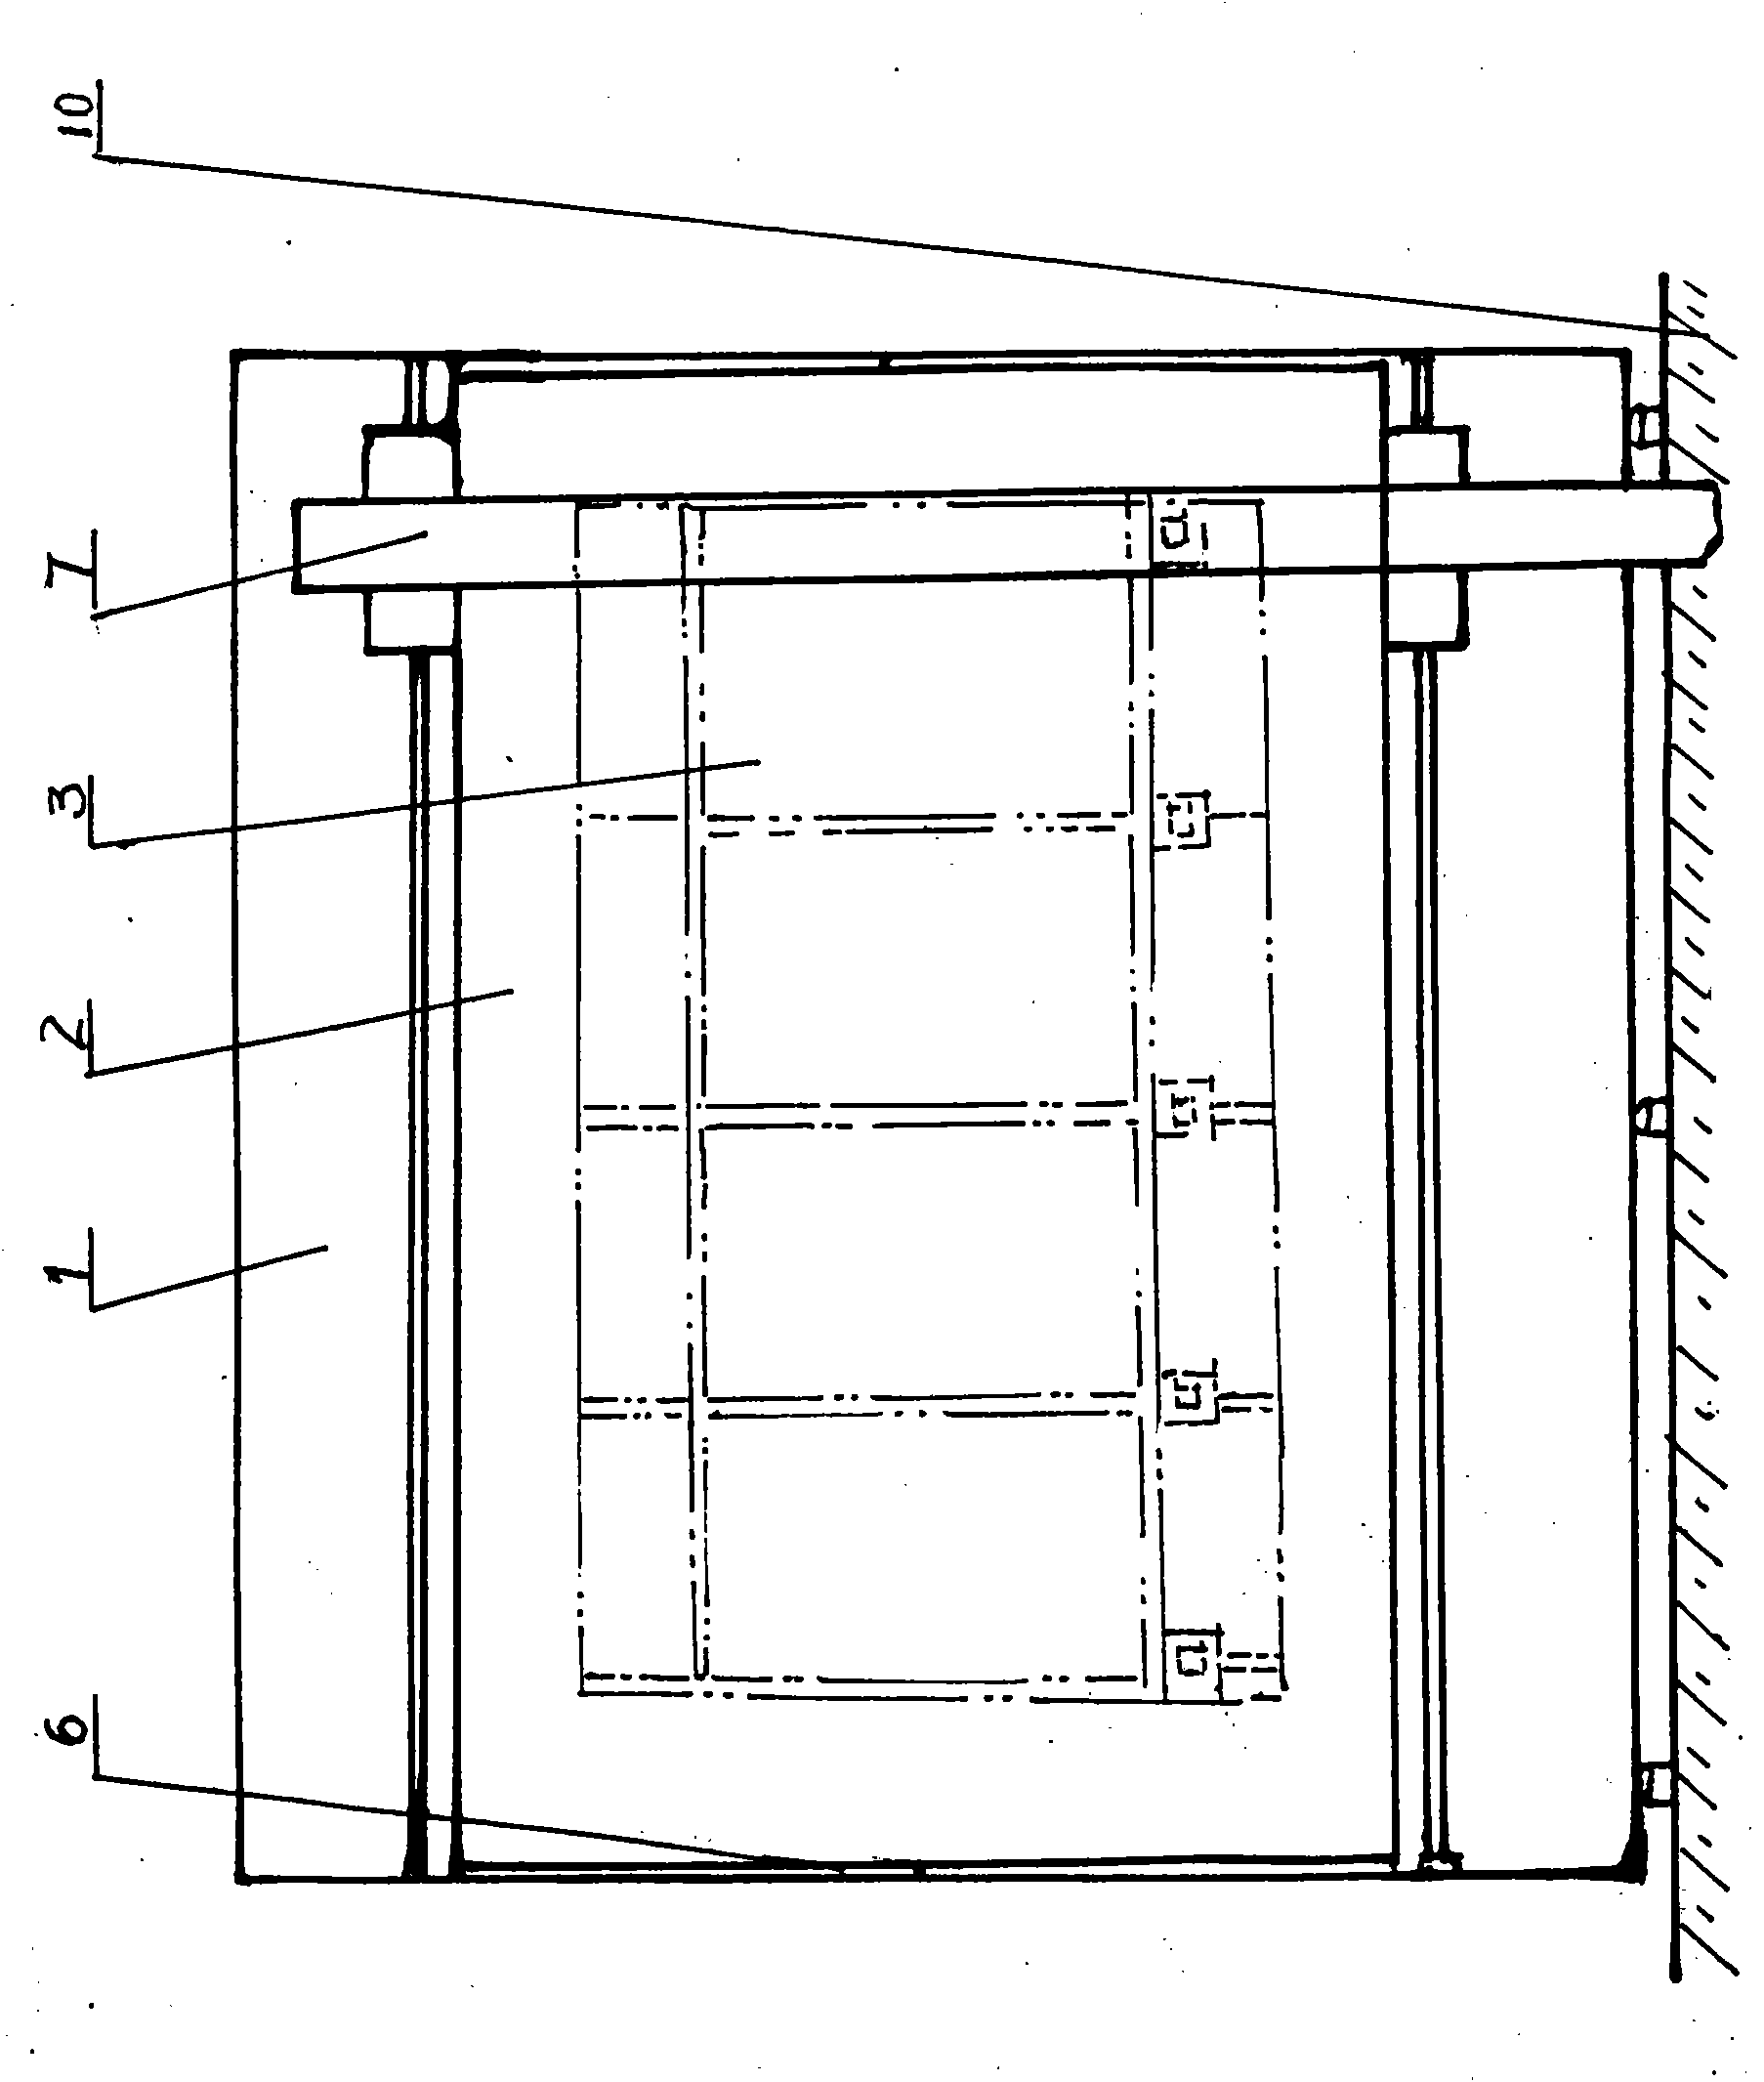 Method for producing caisson by using floating dock box